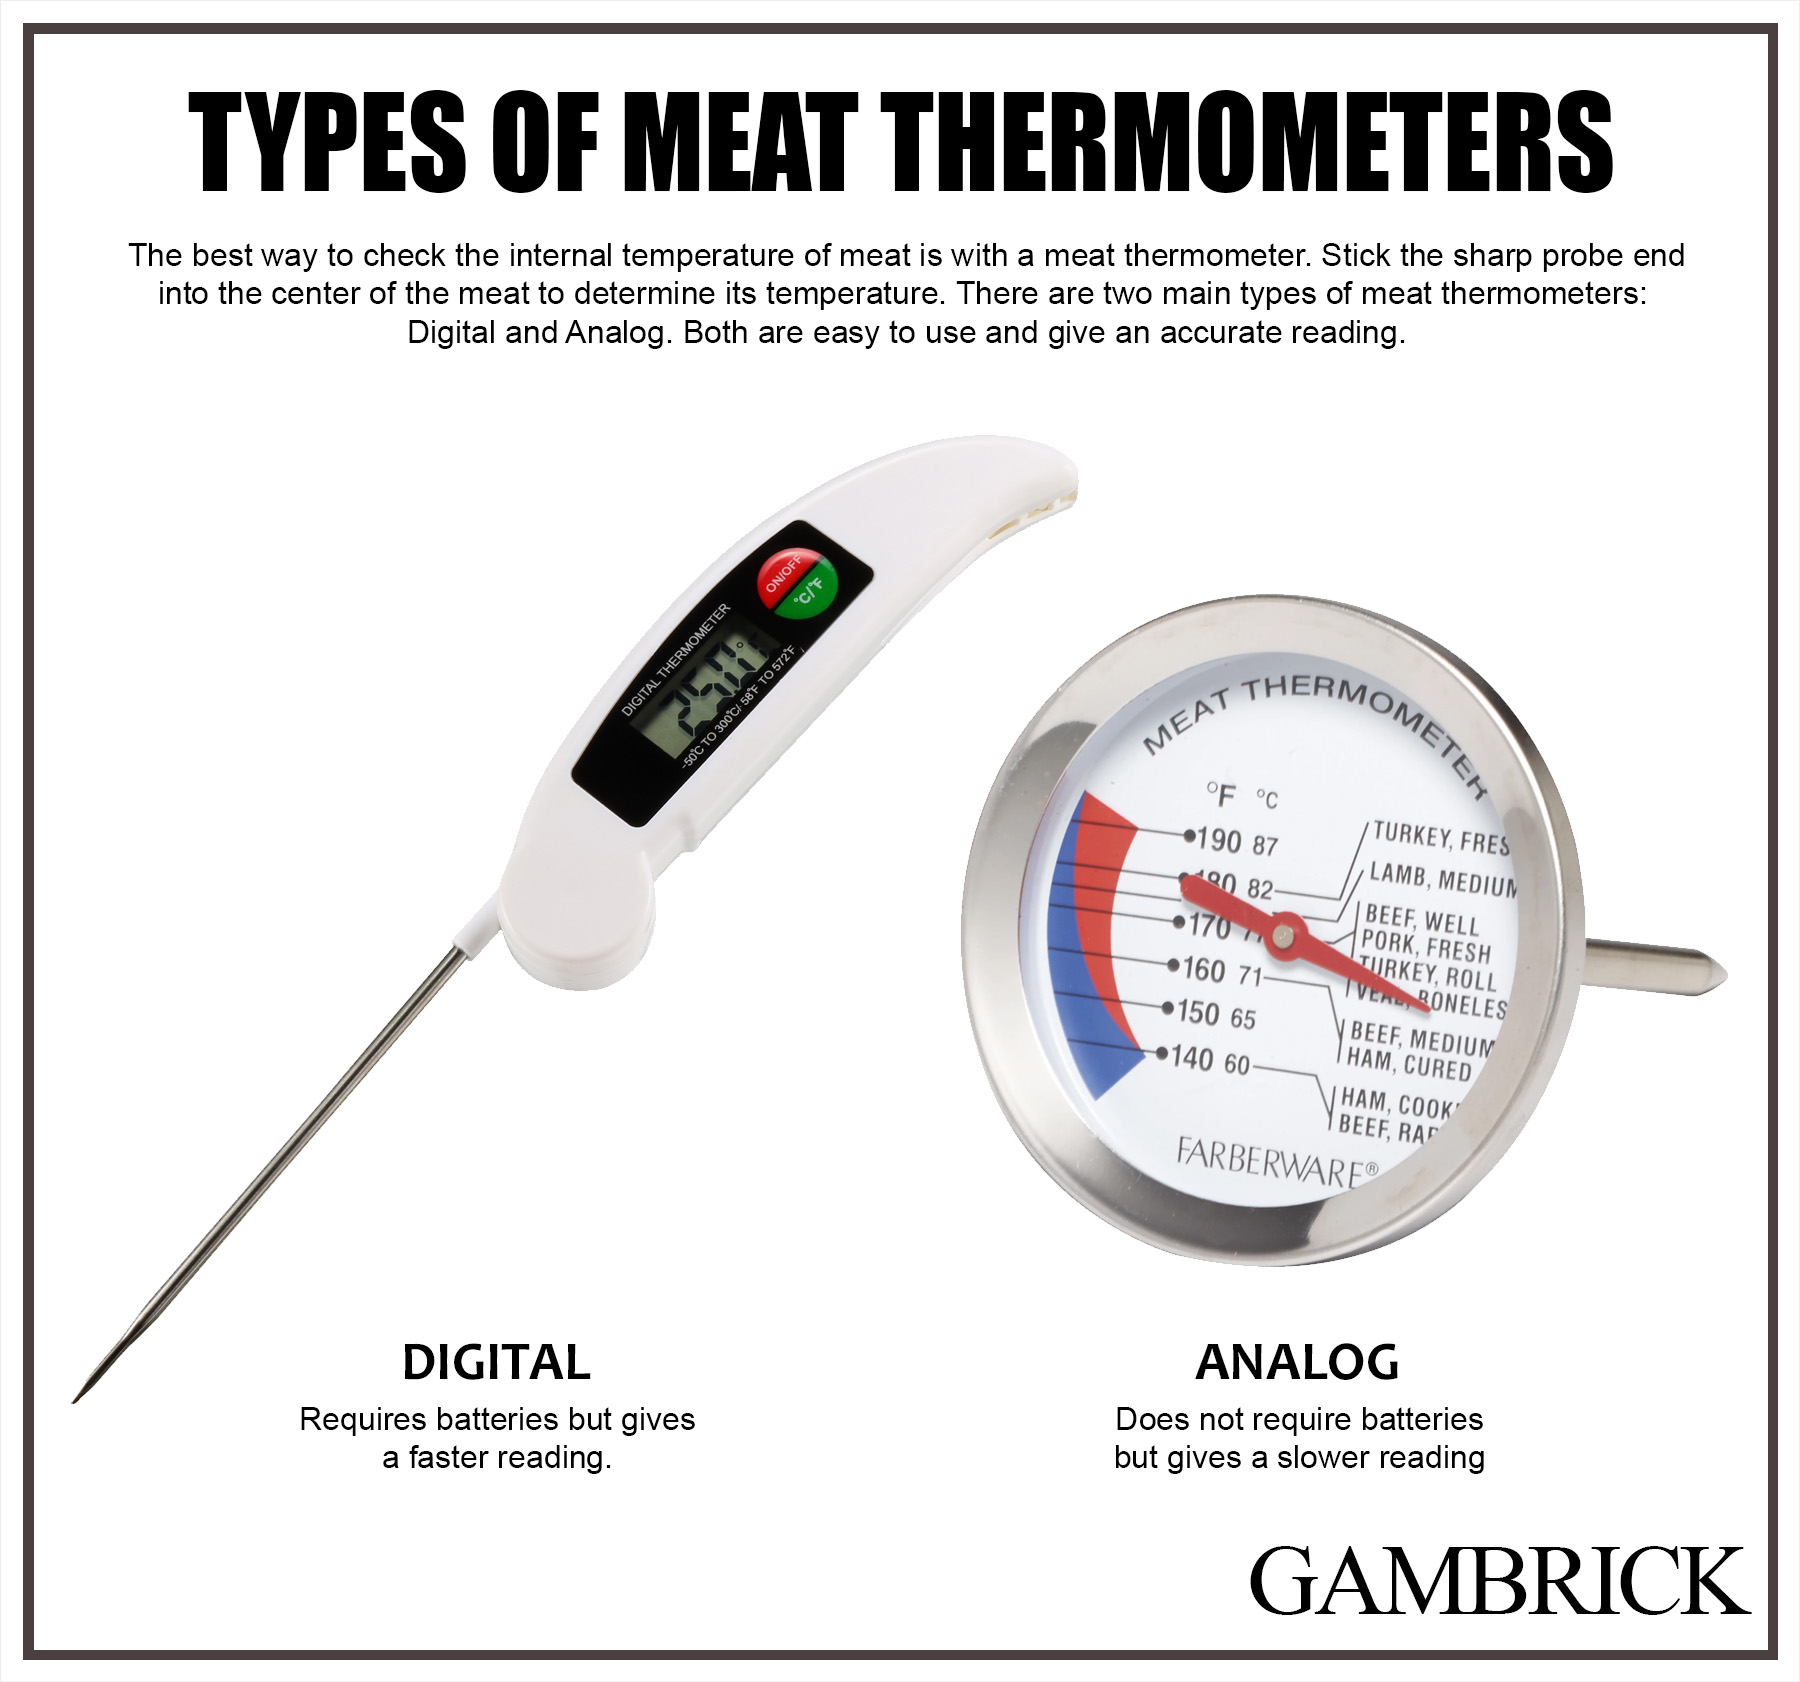 types of meat thermometers infographic chart 1